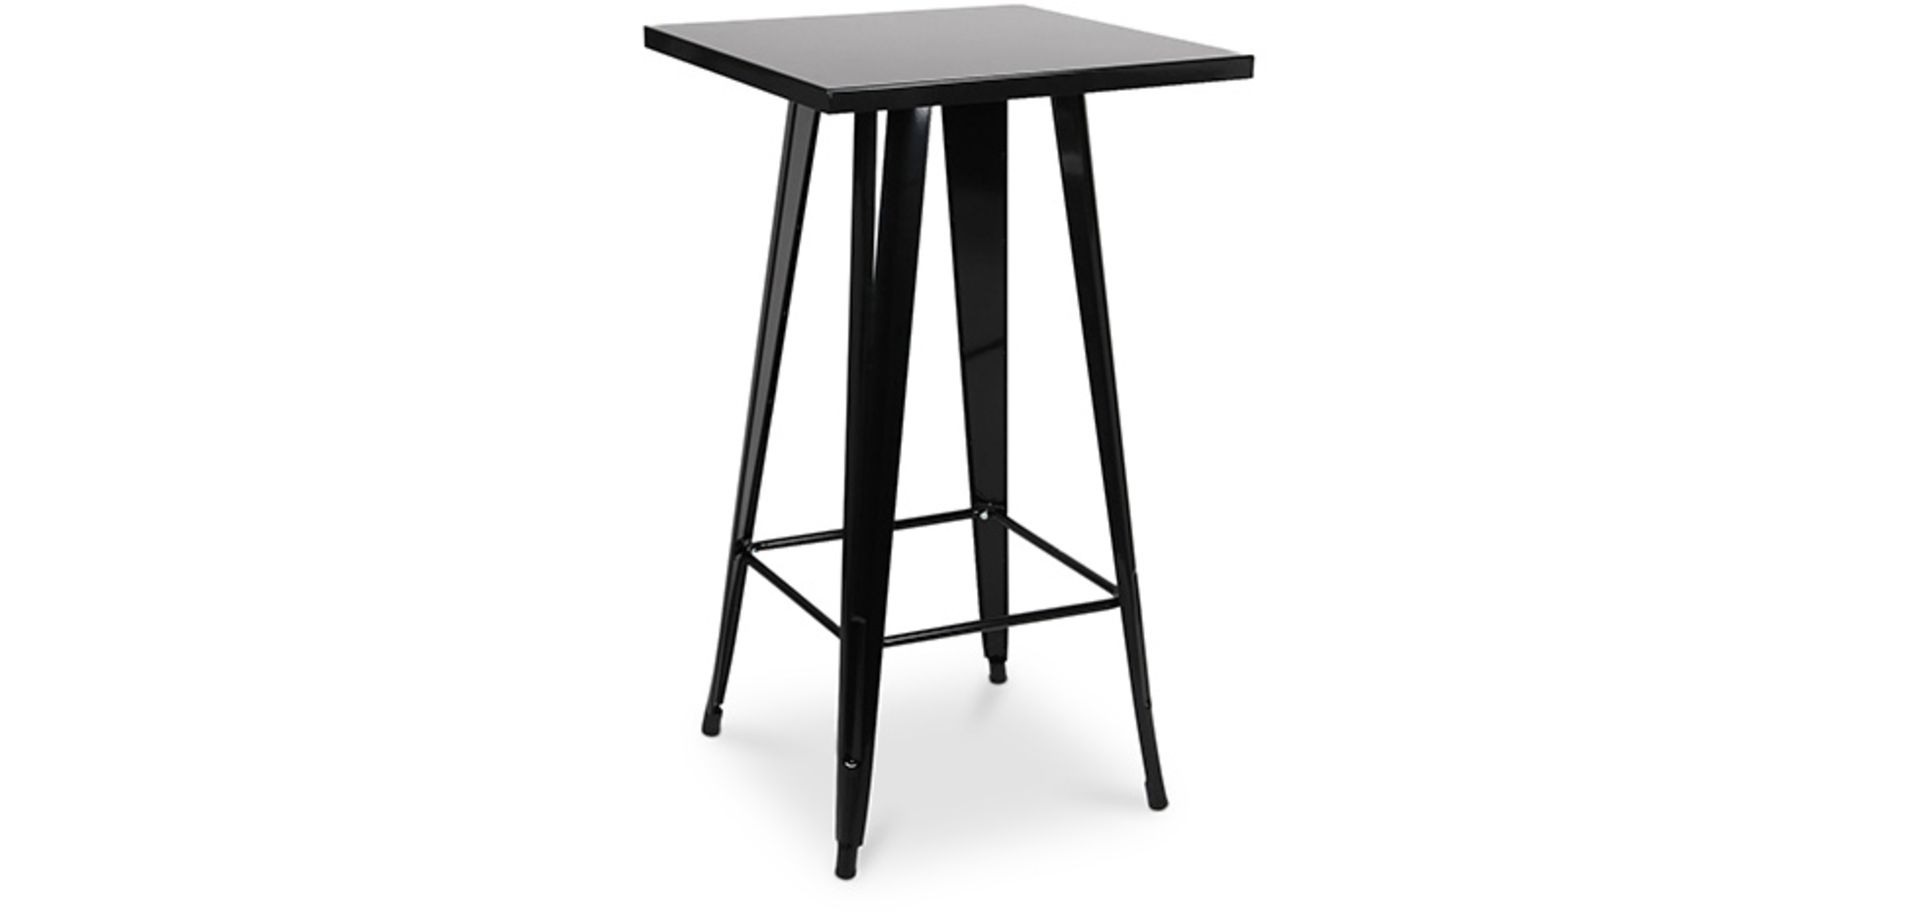 1 x Tolix Industrial Style Outdoor Bar Table and Bar Stool Set in Black - Includes 1 x Bar Table and - Image 6 of 9